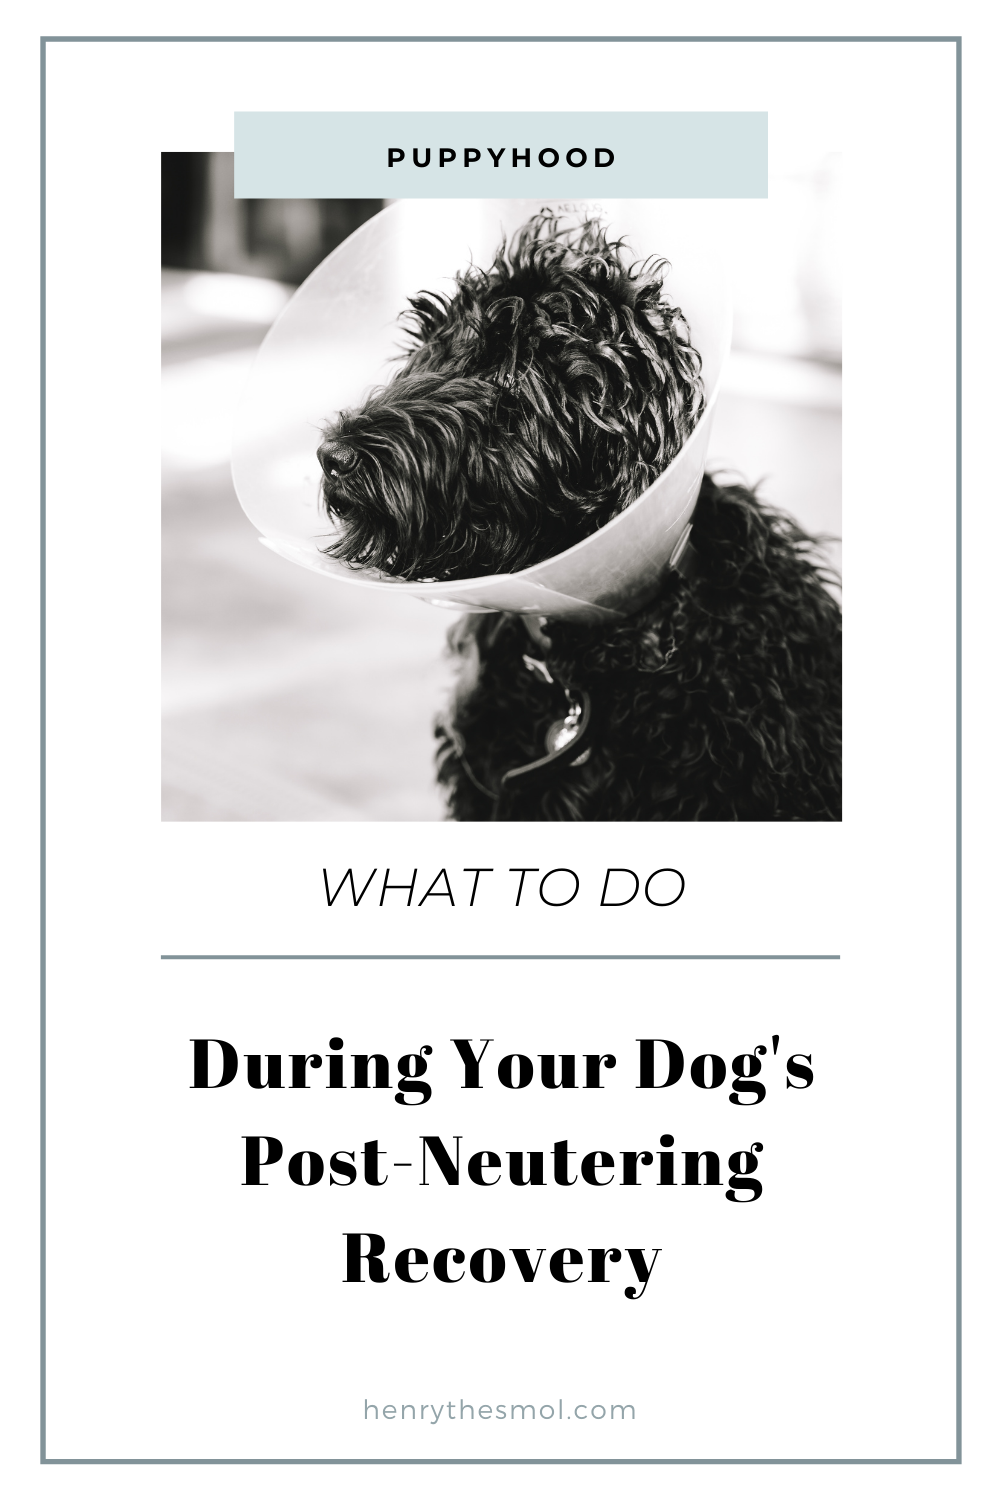 What to Expect When Neutering Your Dog